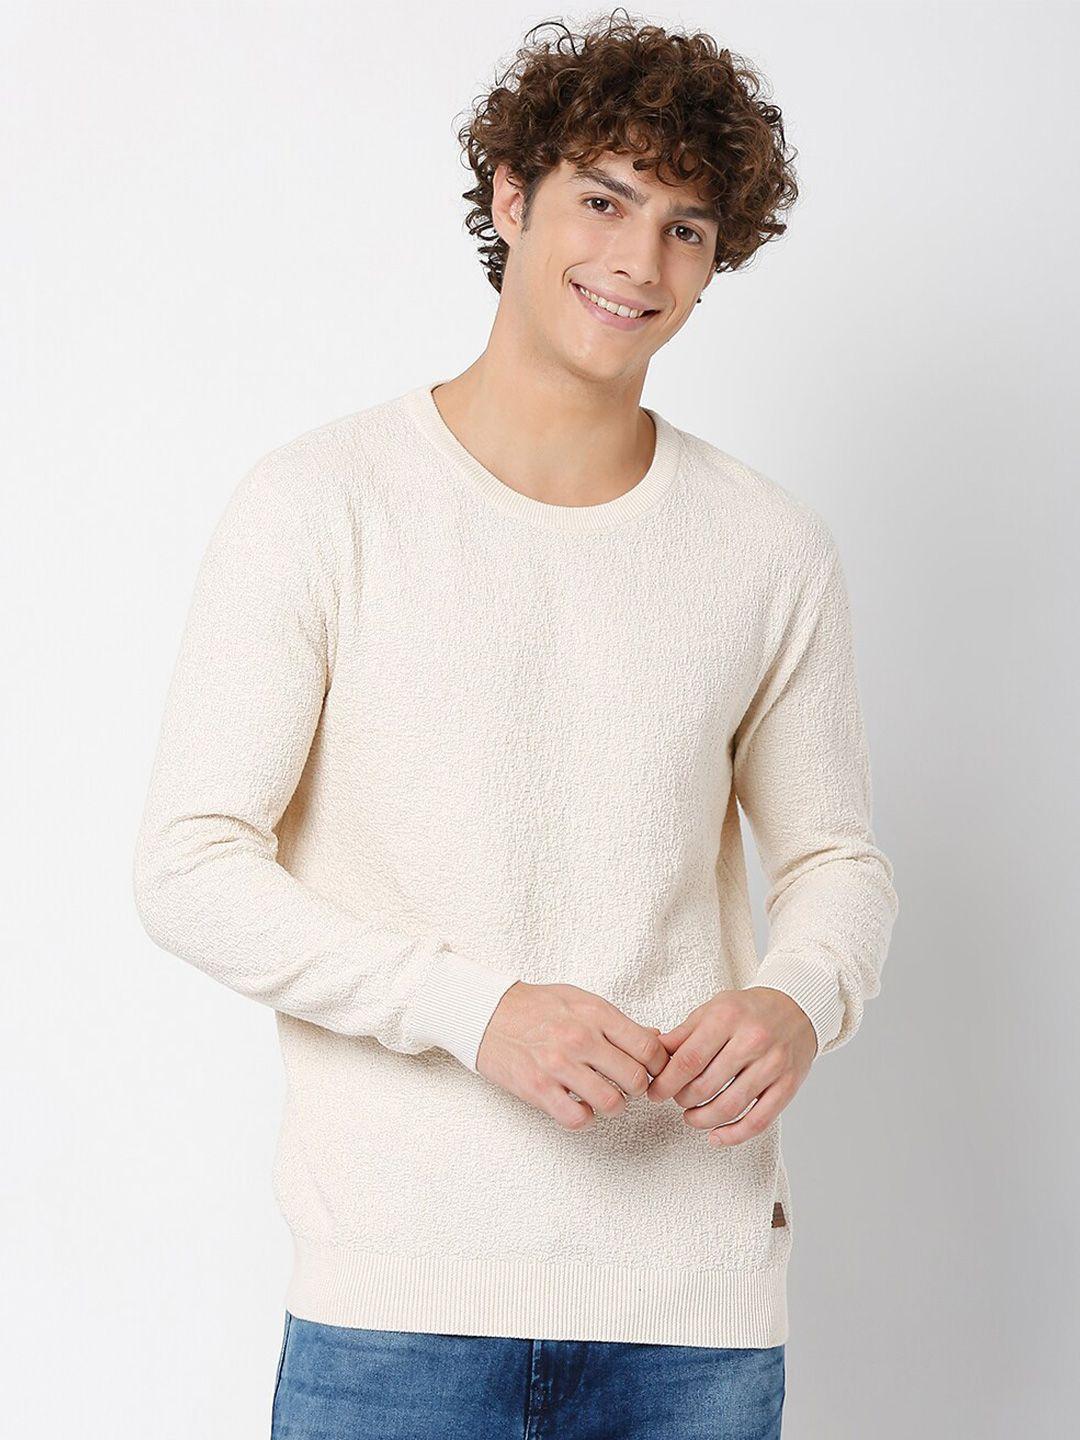 mufti-men-beige-solid-long-sleeves-pullover